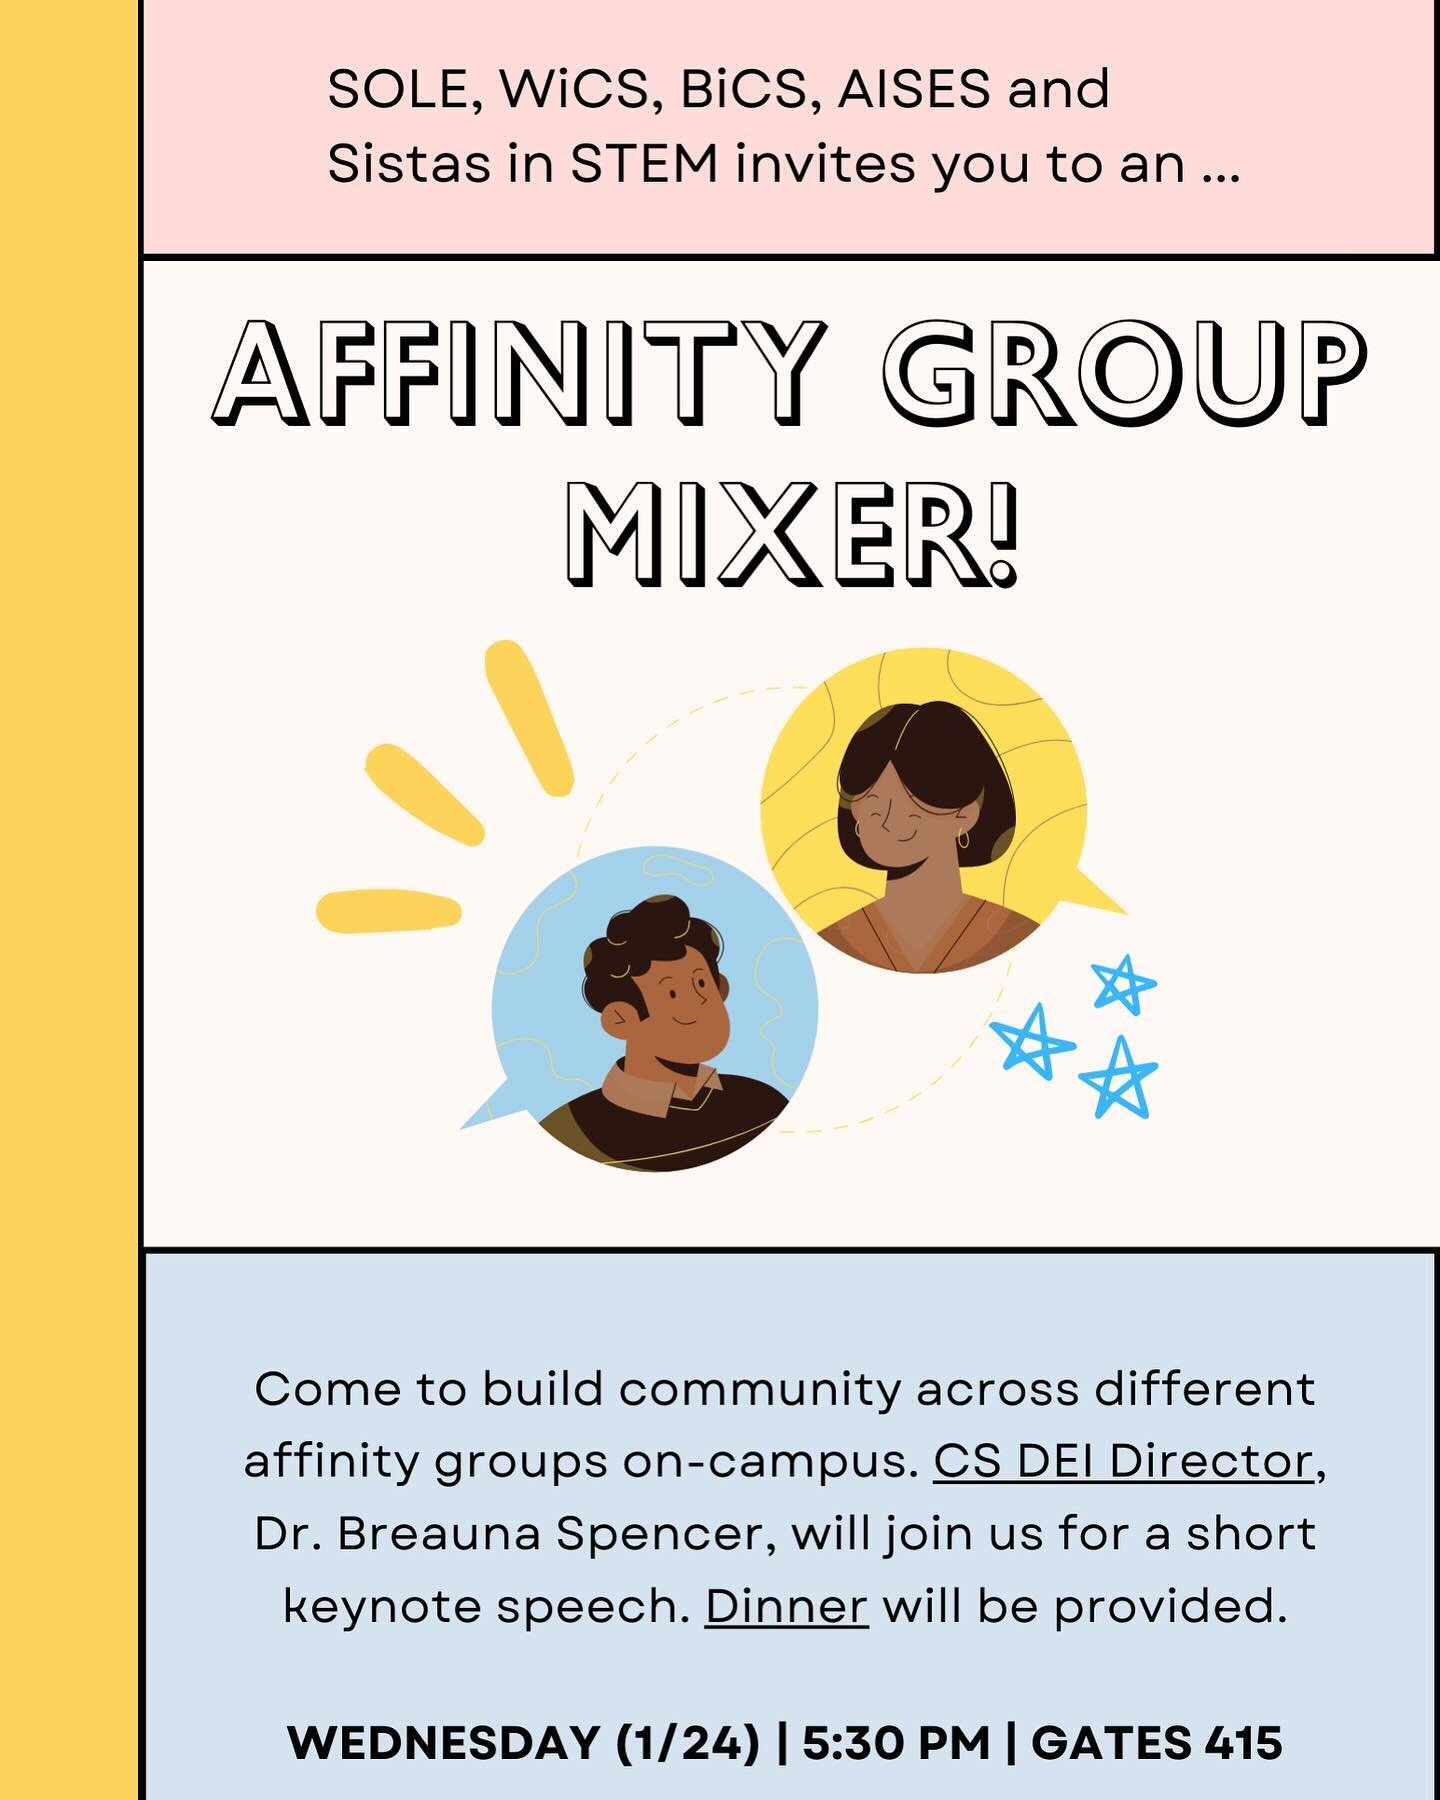 💜WiCS, SBSE , SOLE, AISES Diversity Mixer!💜

Please join these organizations for a talk by Breauna Spencer, director of DEI at the Computer Science department with pizza (&amp; boba for the first 20 attendees!)
Come for great discussion, mingling, 